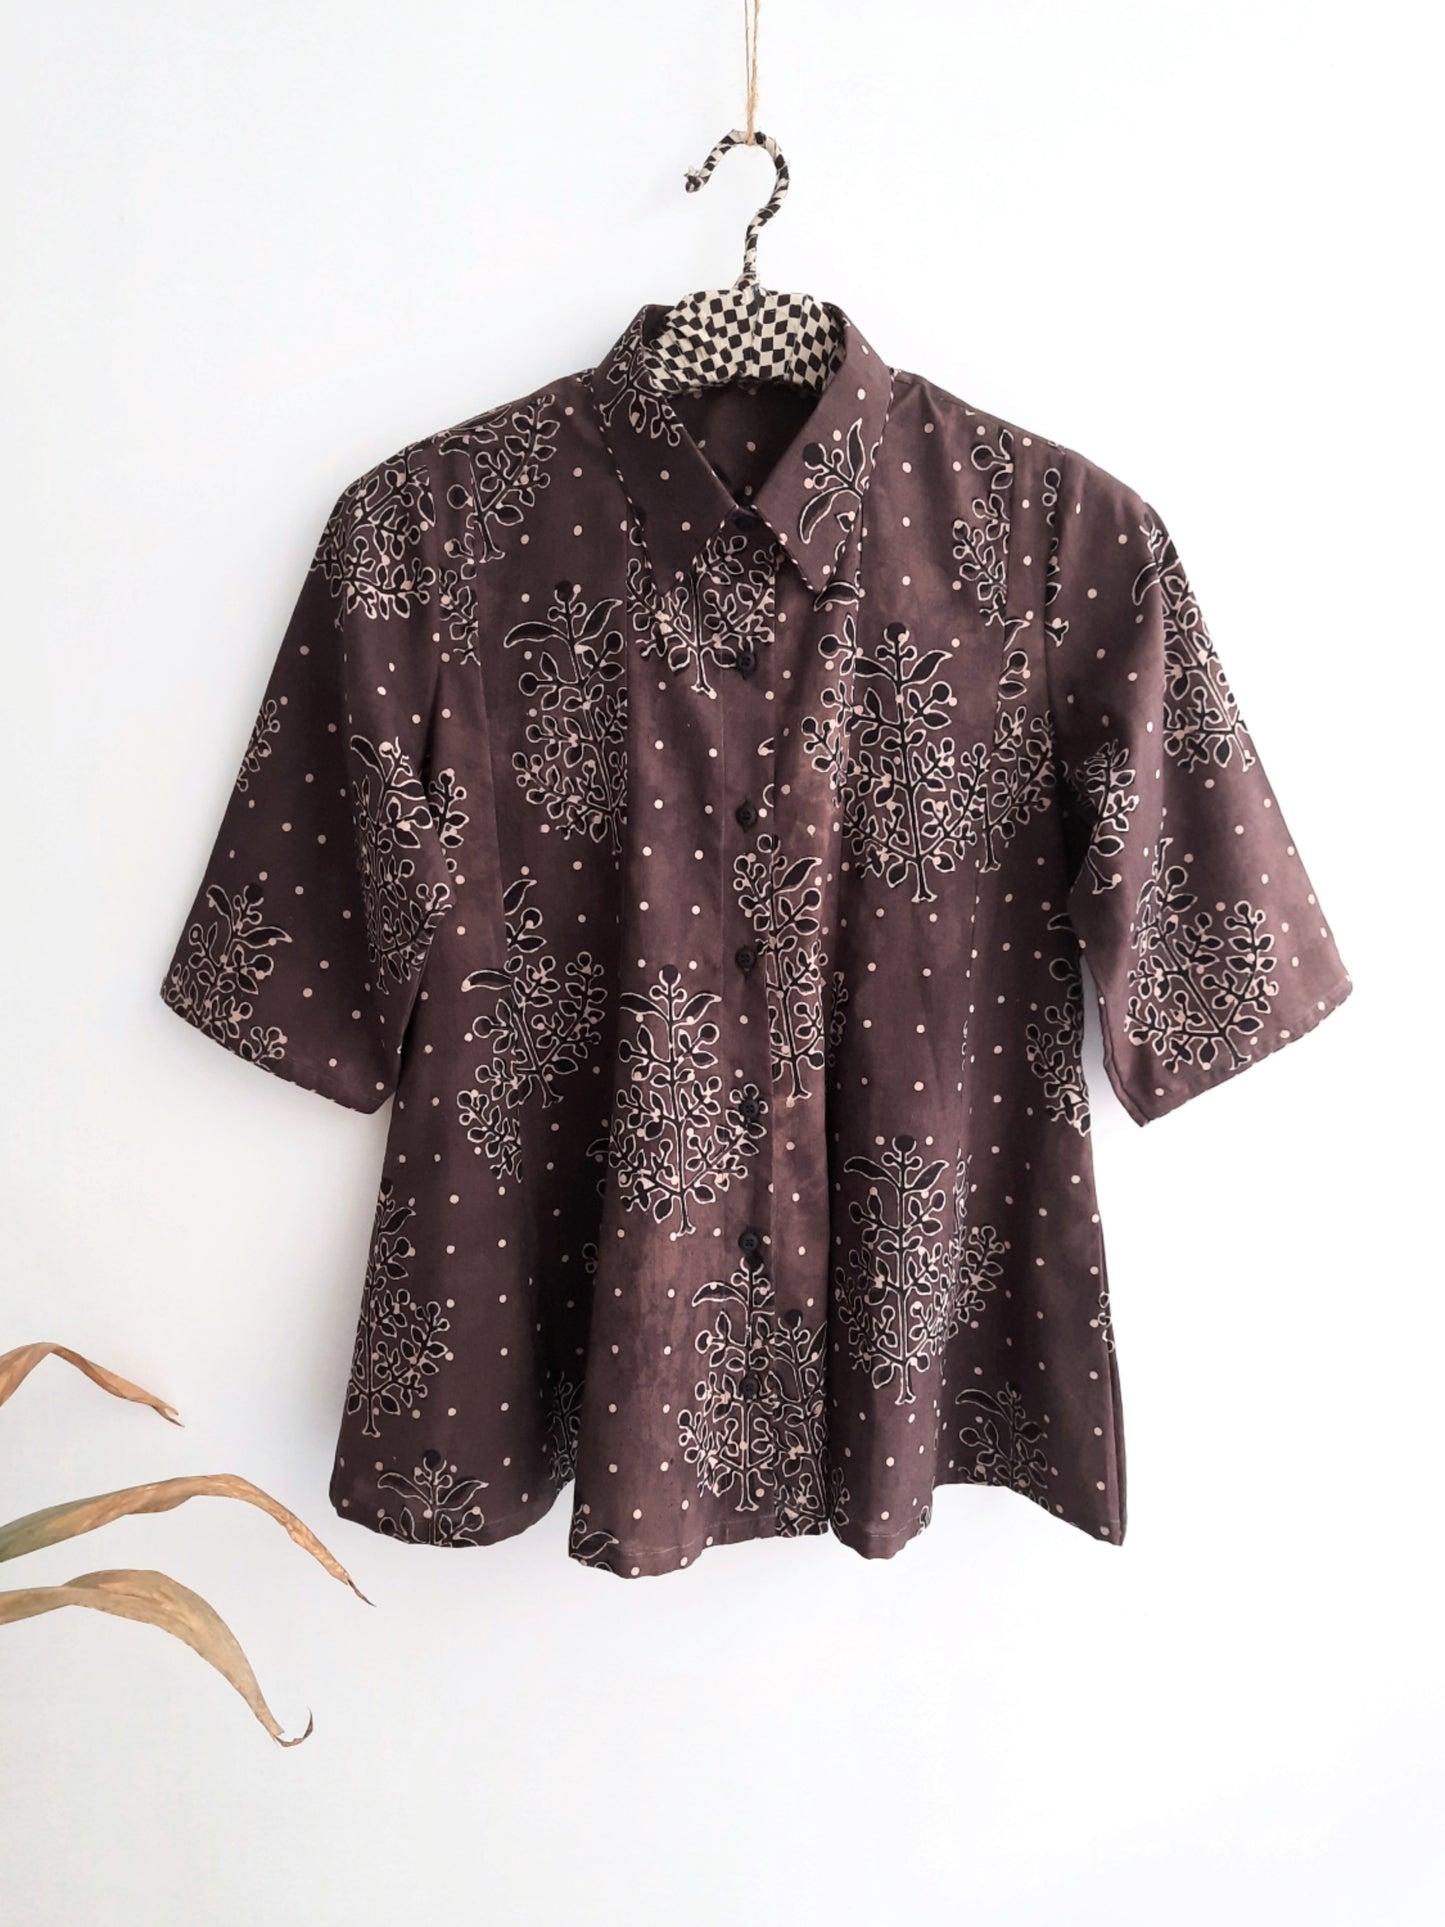 Brown Ajrakh hand block printed cotton shirt for women, showcasing intricate patterns and natural dye craftsmanship, ideal for breathable summer wear.